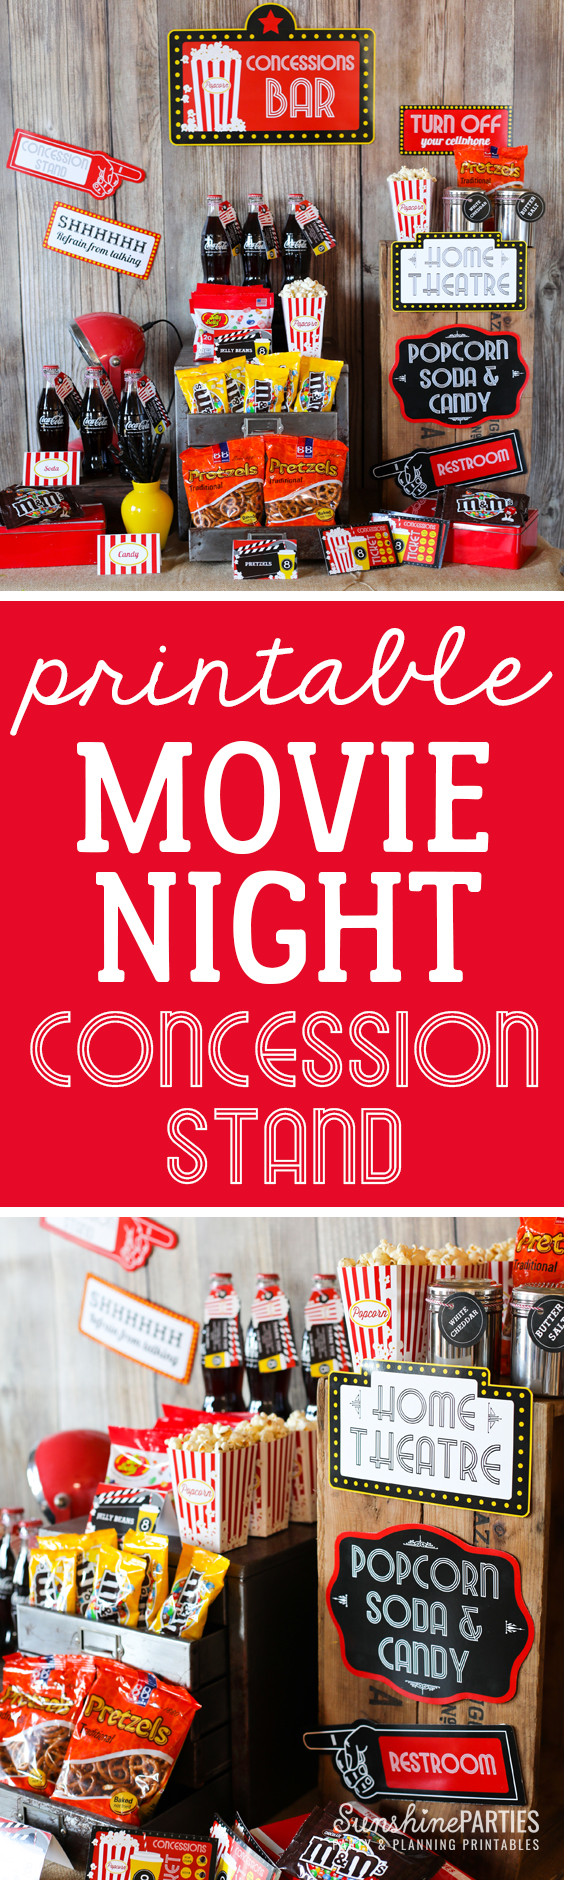 A movie night is the BEST fun - whether its teens, movie buffs or just a good night in with the besties, this vintage-inspired movie ocncession stand is THE cutest movie night one-stop-shop yo can imagine! The editable, downloadable printables make it absolutely awesome, and they are yours right here! y